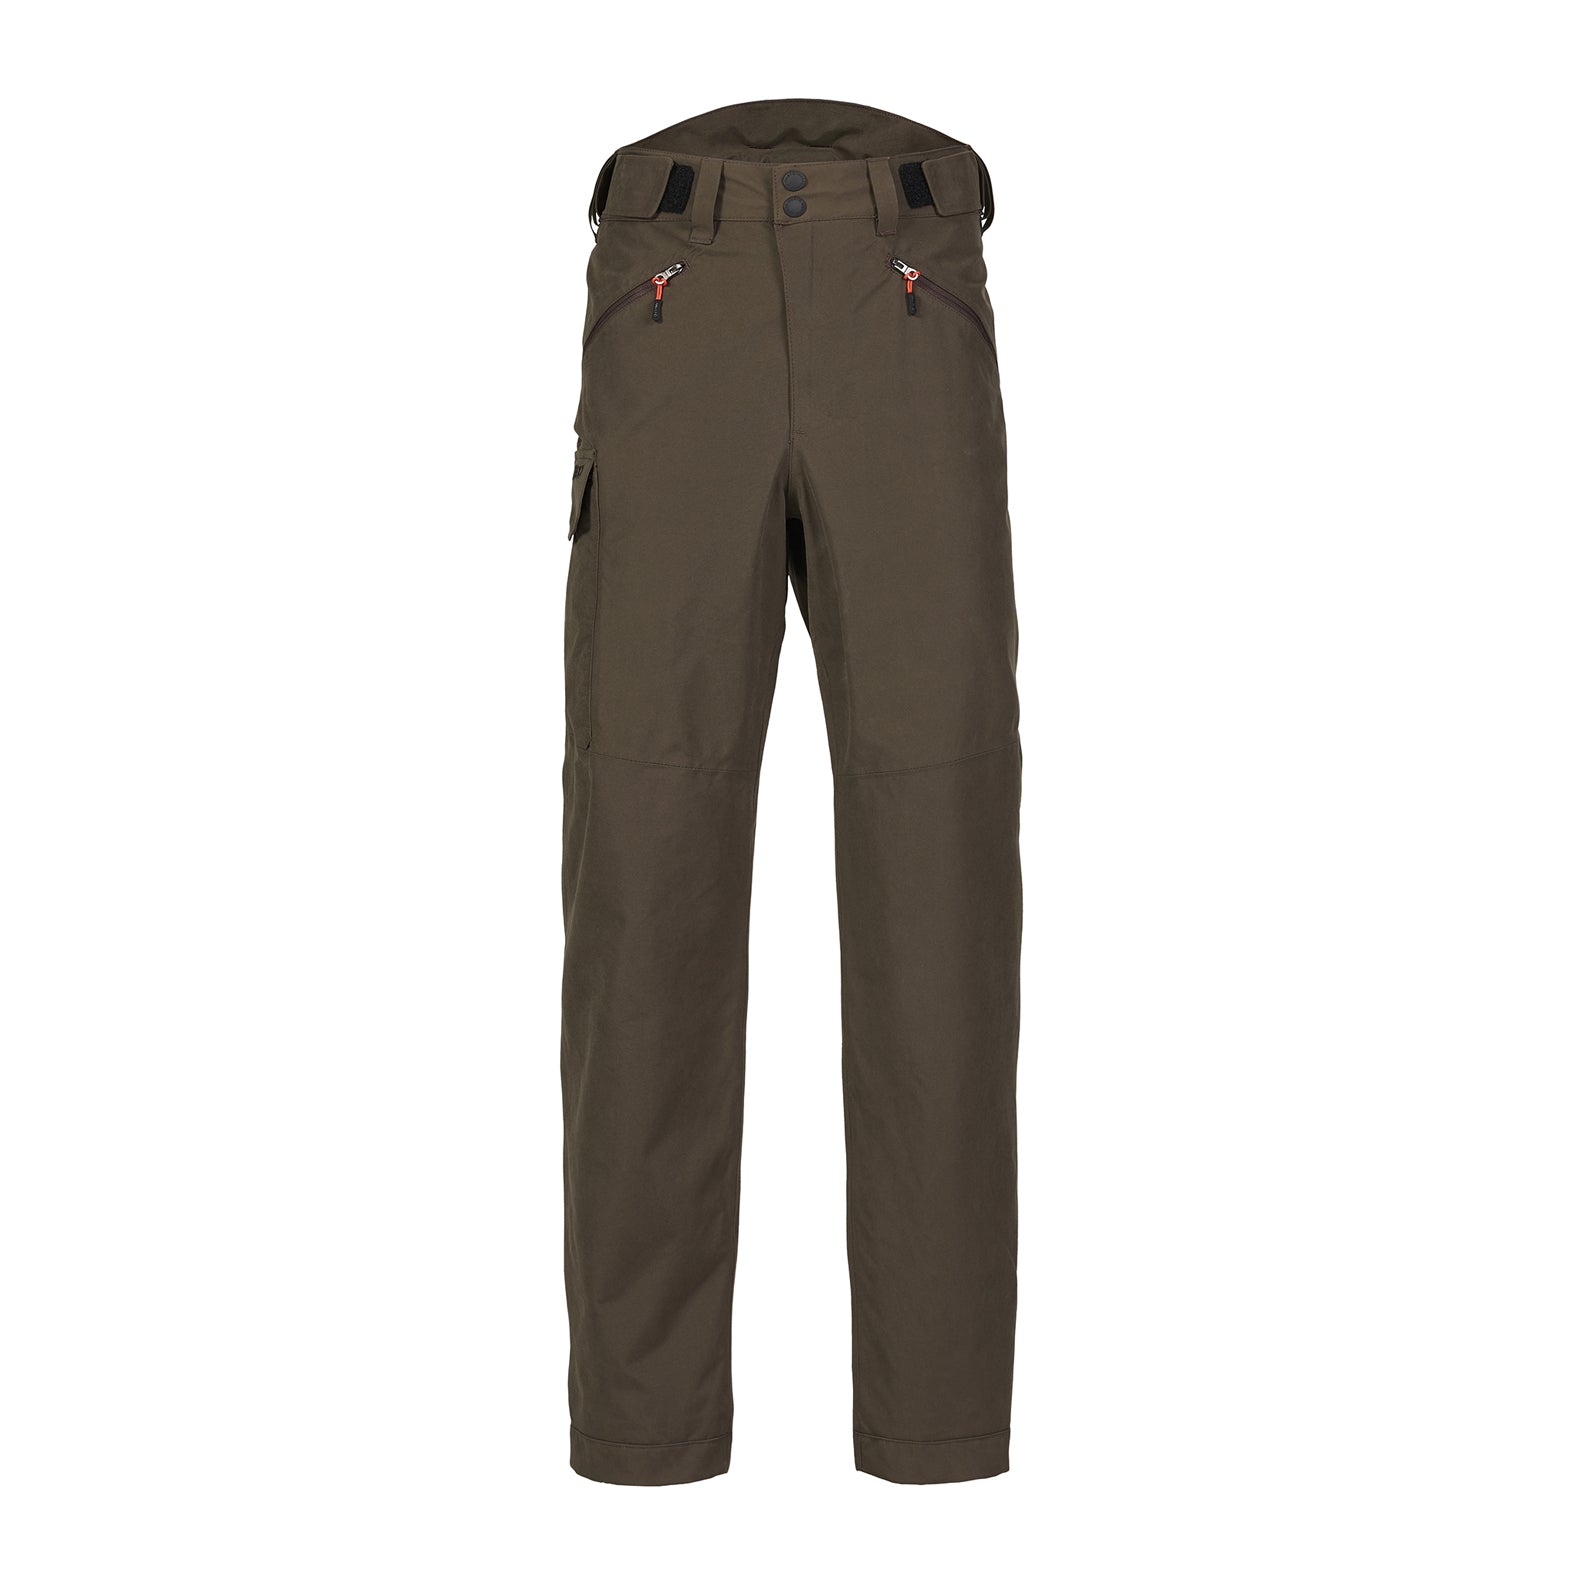 Musto HTX Keepers Set - Jacket &amp; Trousers